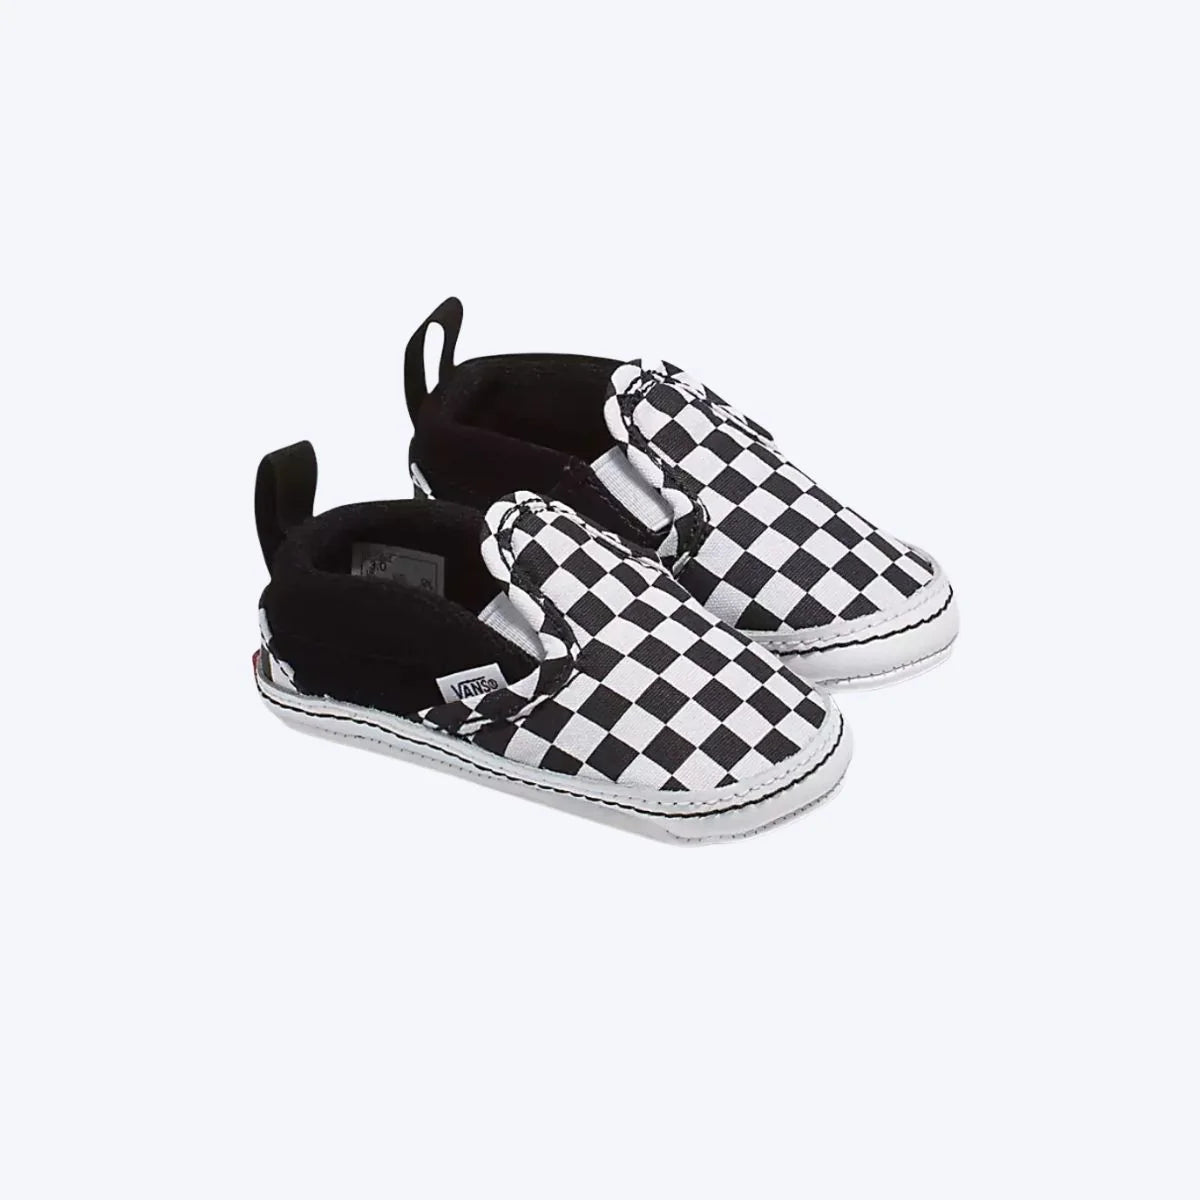 Vans baby shoes in classic black and white checker pattern